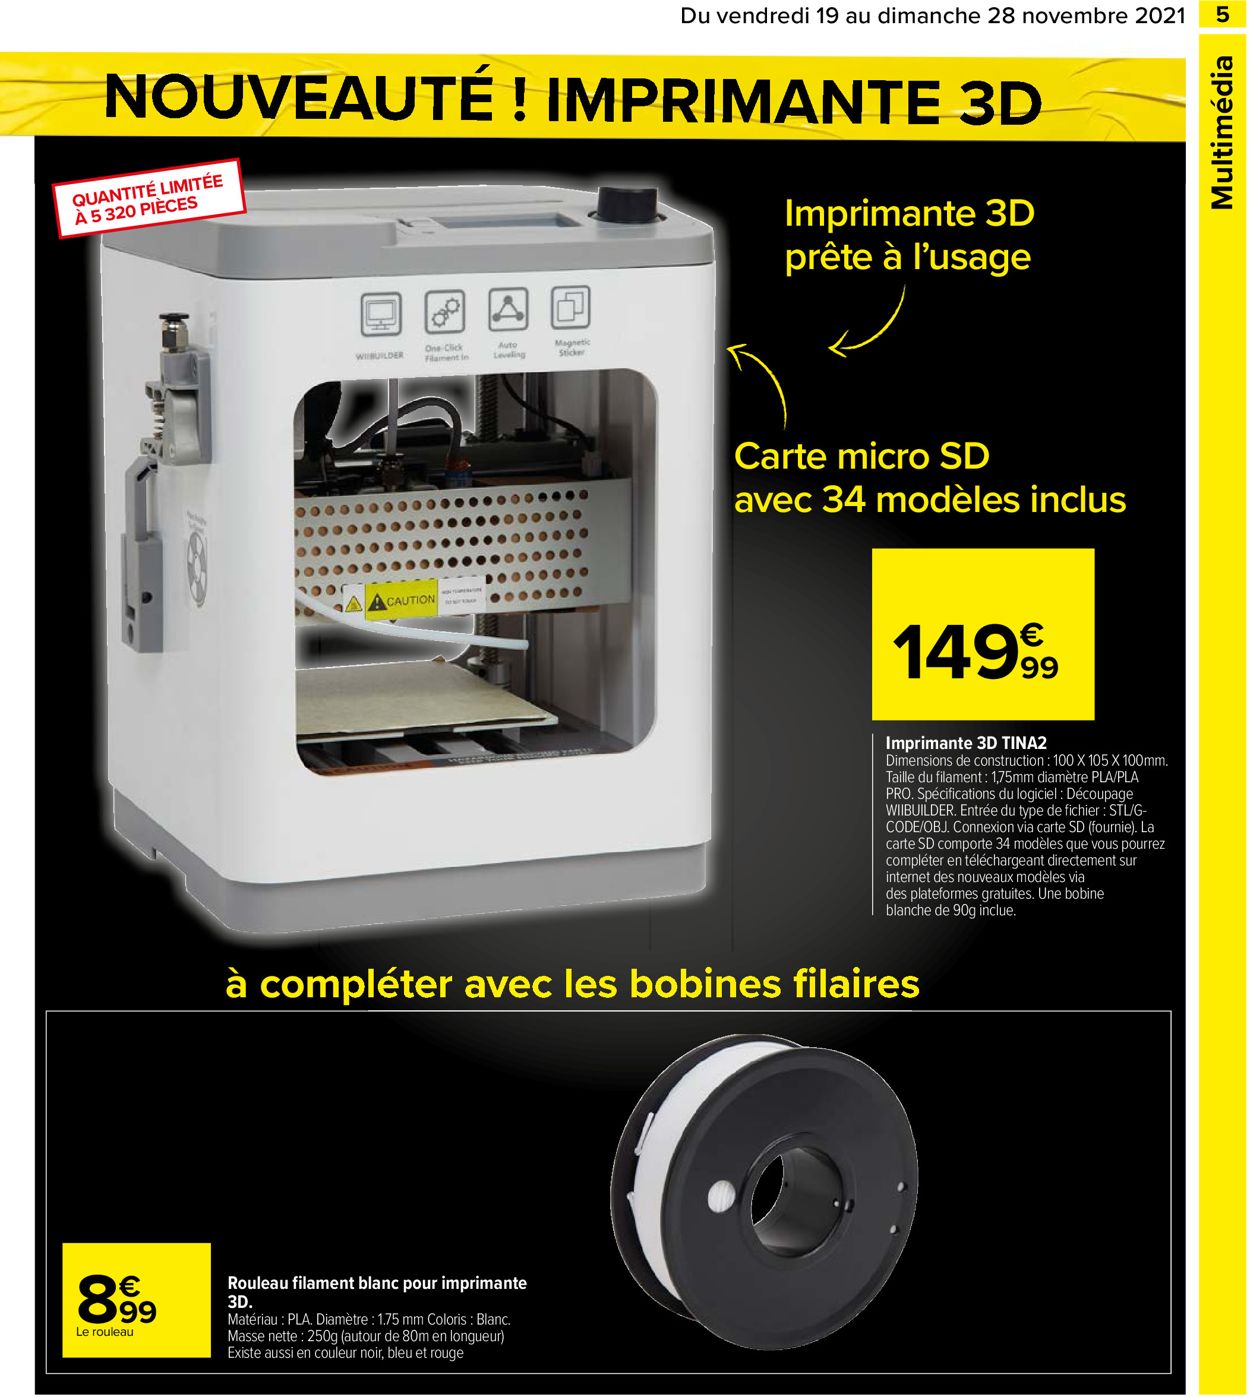 Carrefour BLACK WEEK 2021 Catalogue - 19.11-28.11.2021 (Page 5)